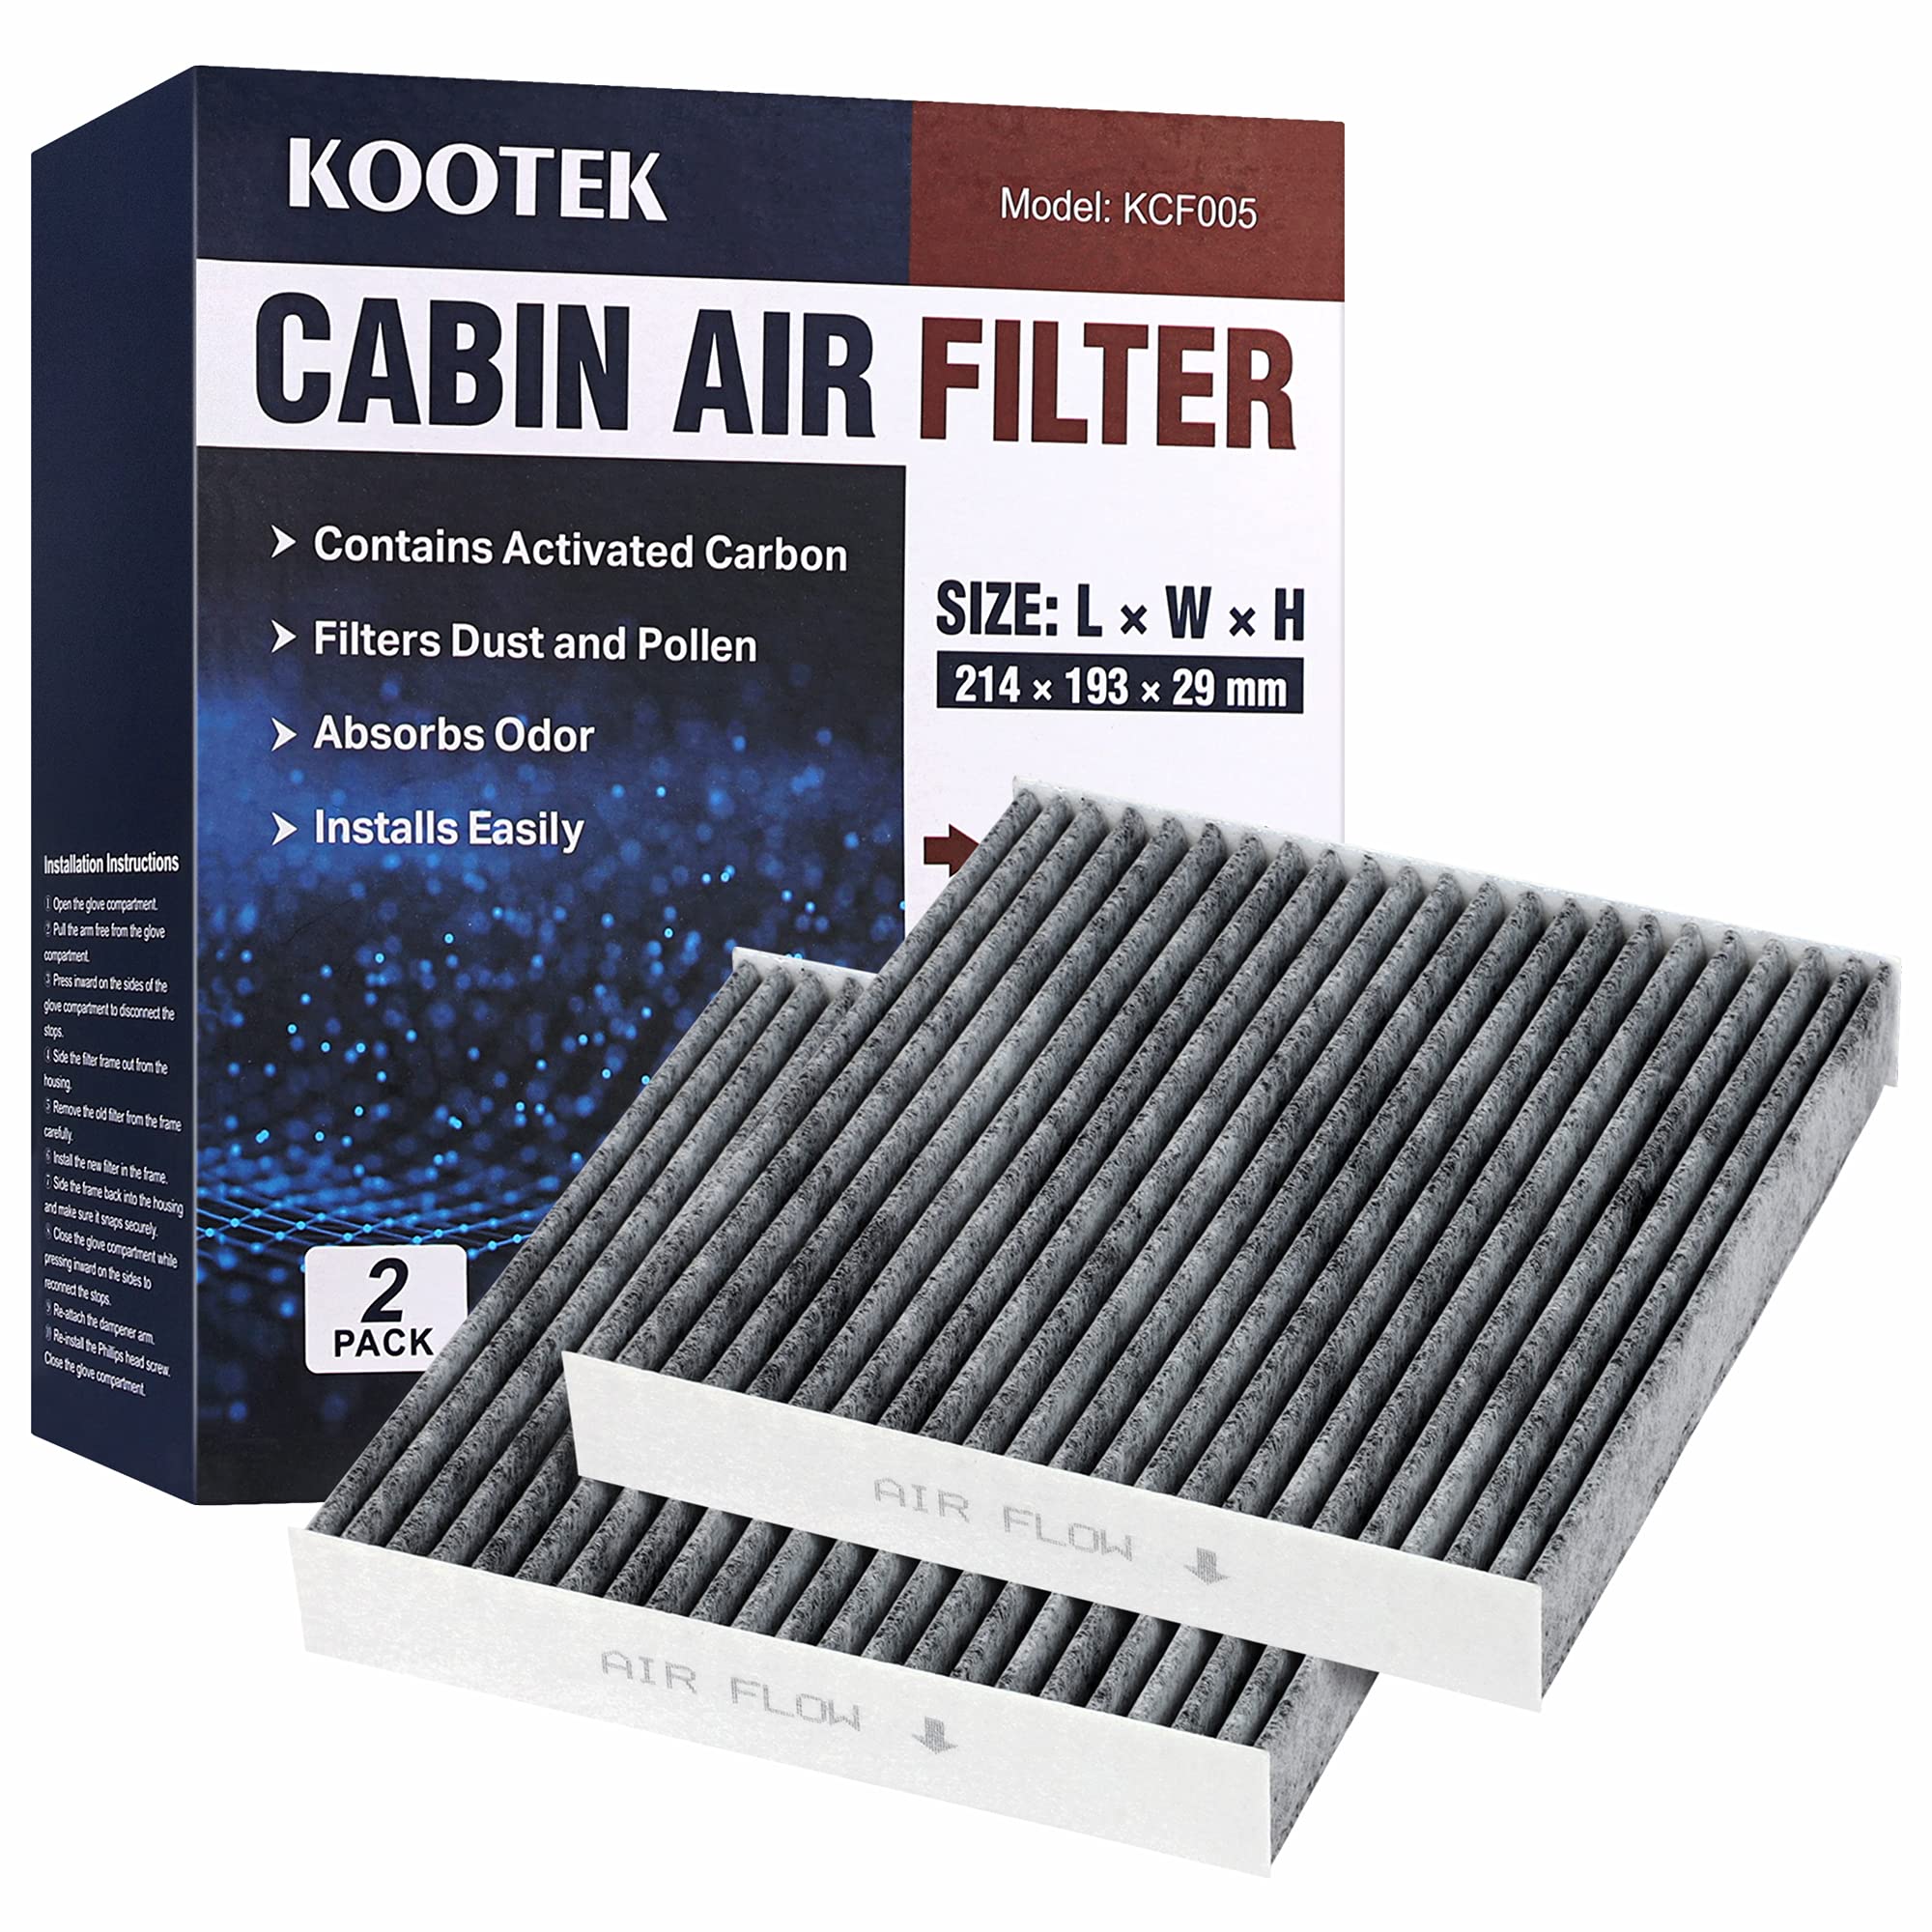 Kootek Car Cabin Air Filter Replacement for CF10285 with Active Carbon for Toyota/Lexus/Scion/Subaru, against Bacteria Dust Viruses Pollen Gases Odors, 2 Pack